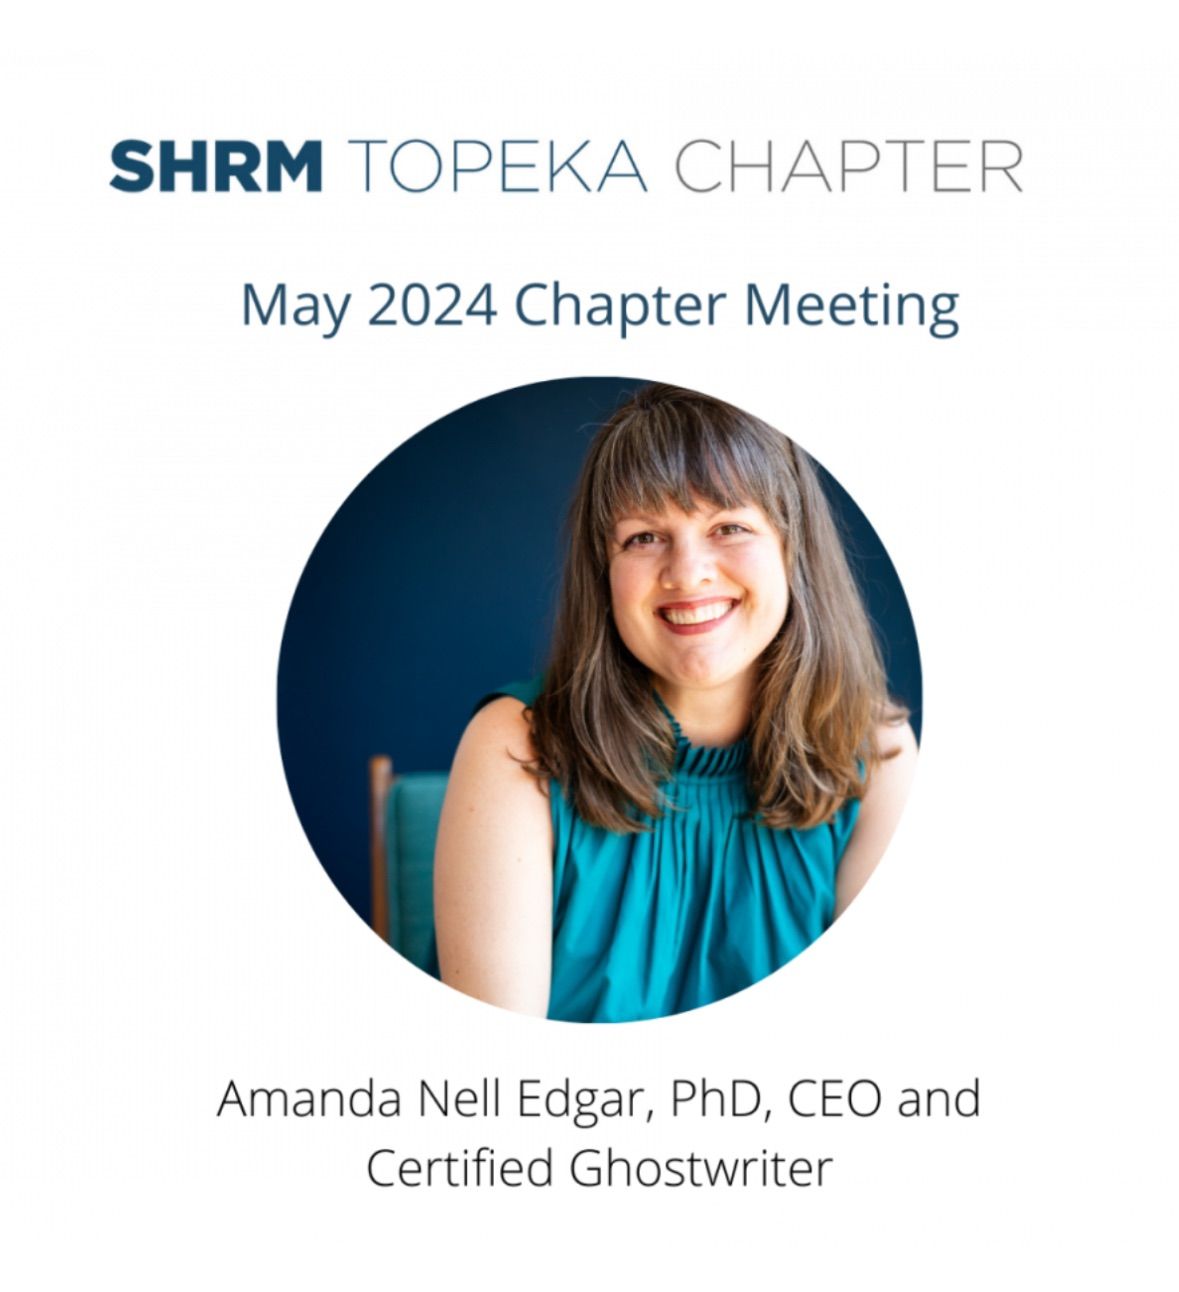 May 2024 Chapter Meeting: Retention